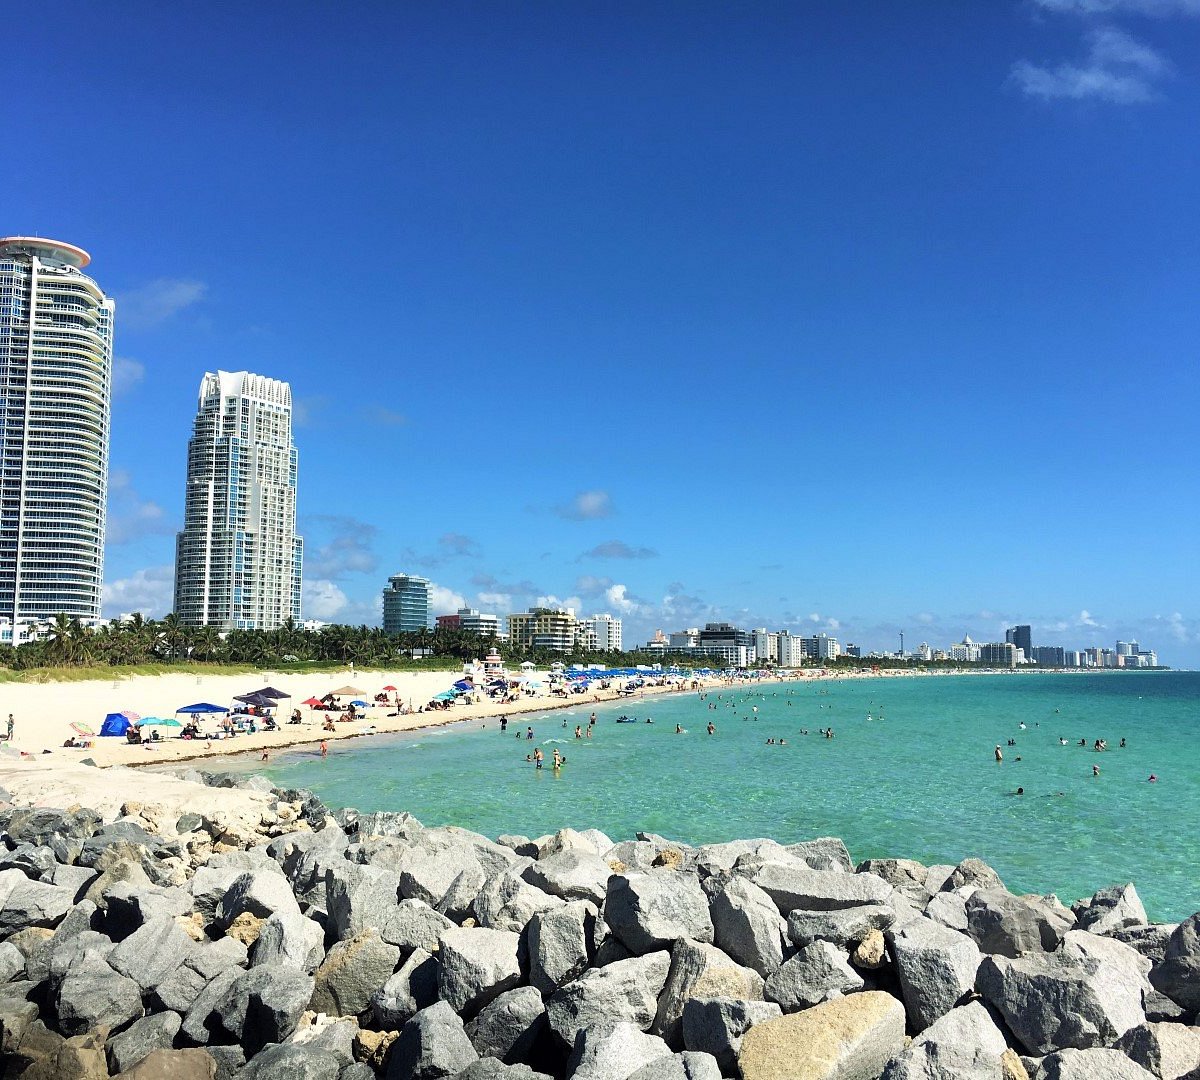 Parking in Miami Beach: 5 Great Spots to Park